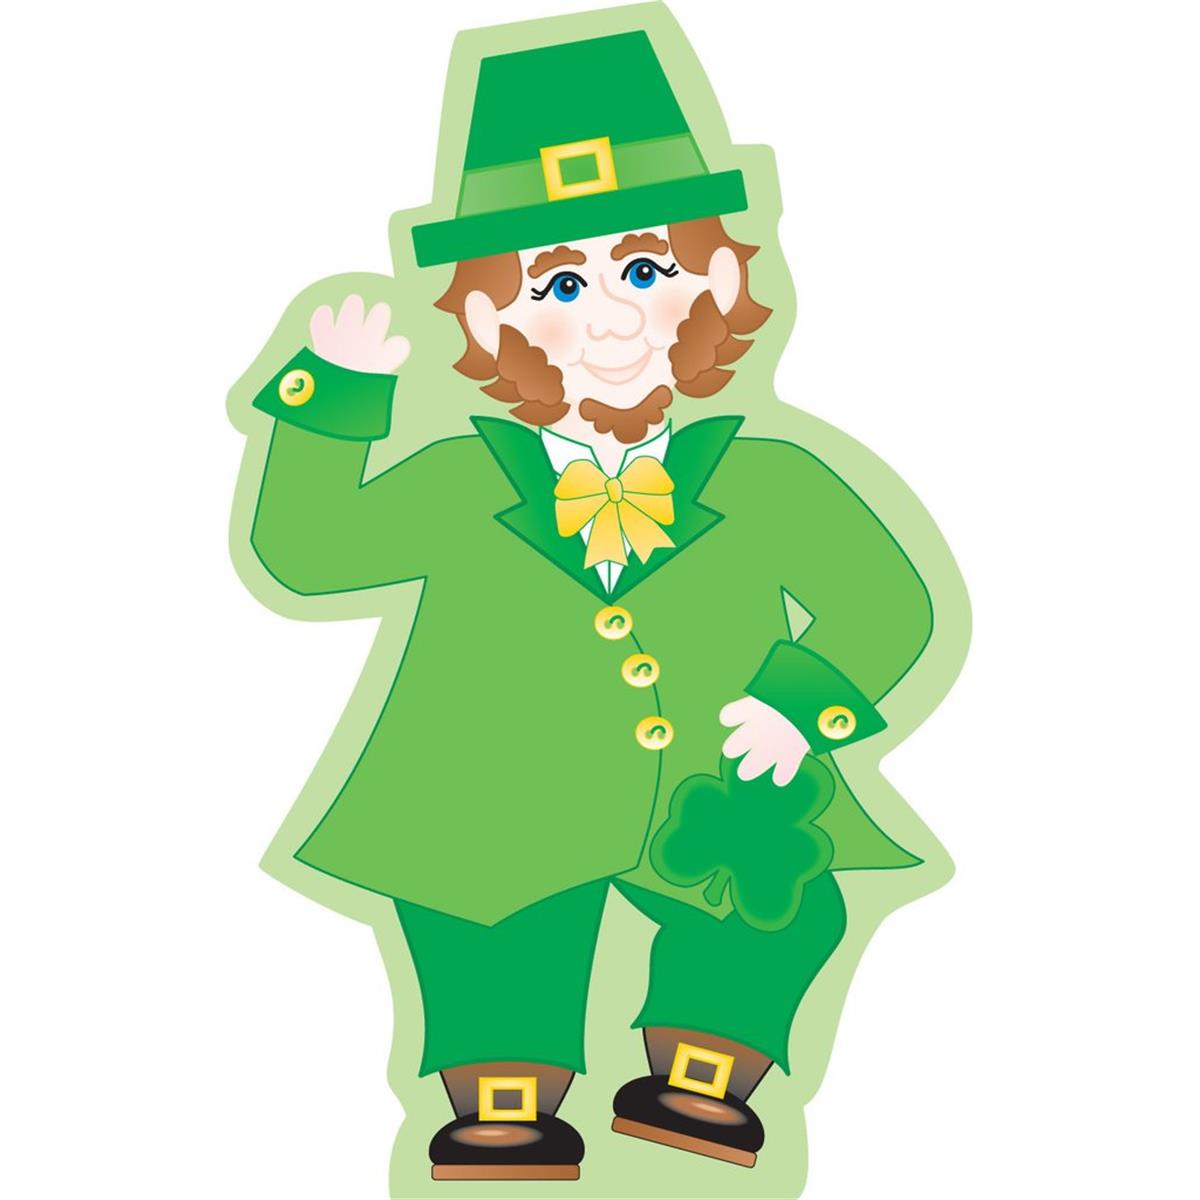 Se-0185 9 X 6 In. Large Notepad, Leprechaun - 50 Sheets Per Pack